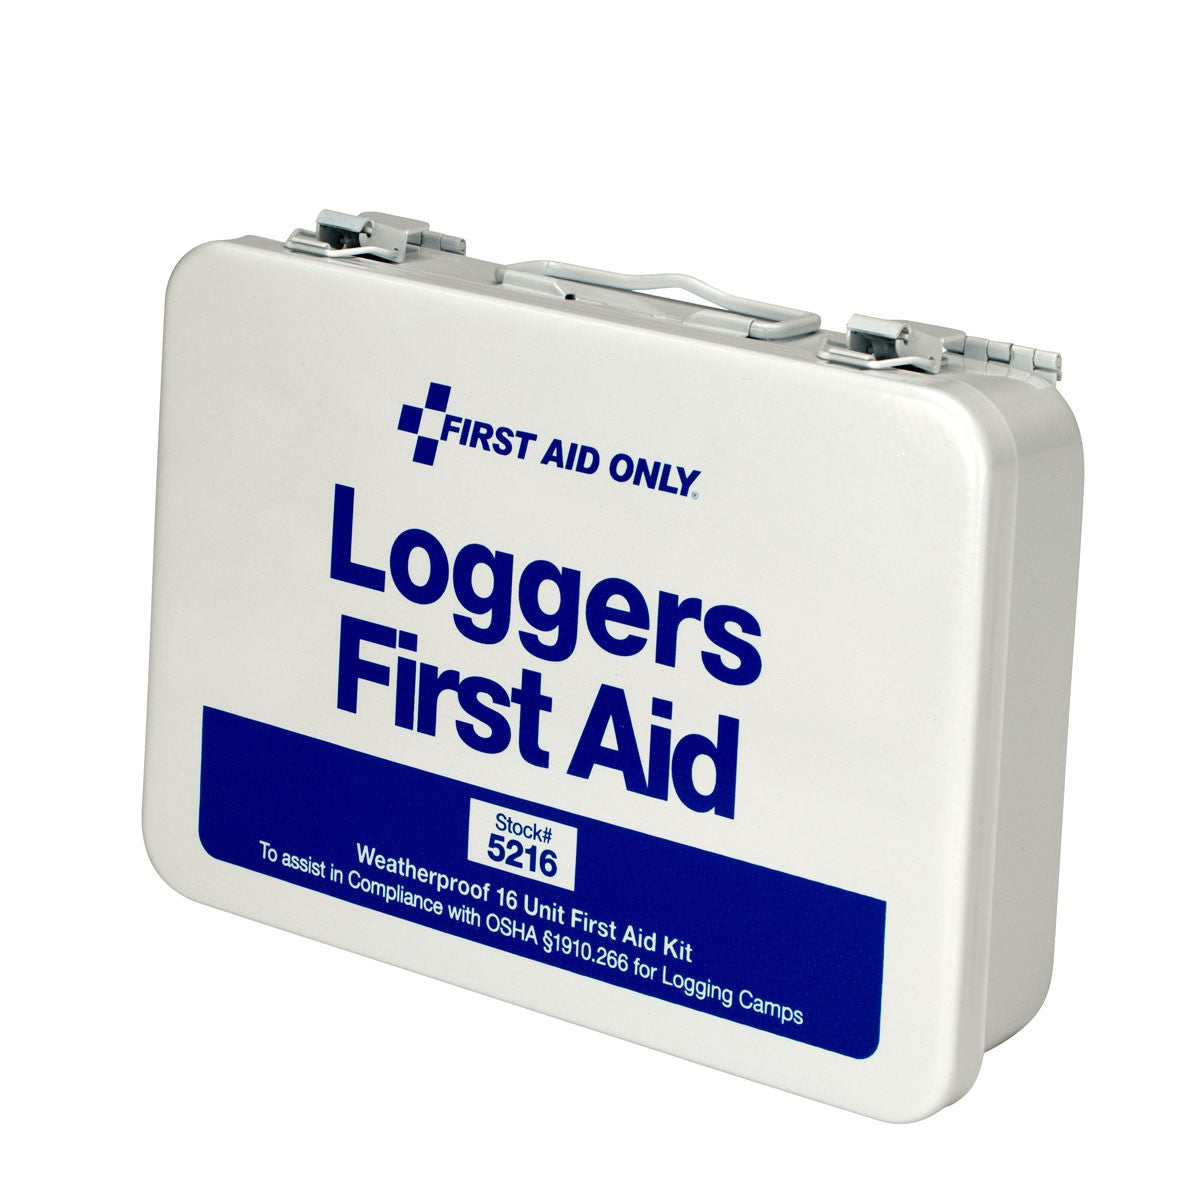 25 Person Loggers First Aid Kit, Metal Weatherproof Case - W-5216